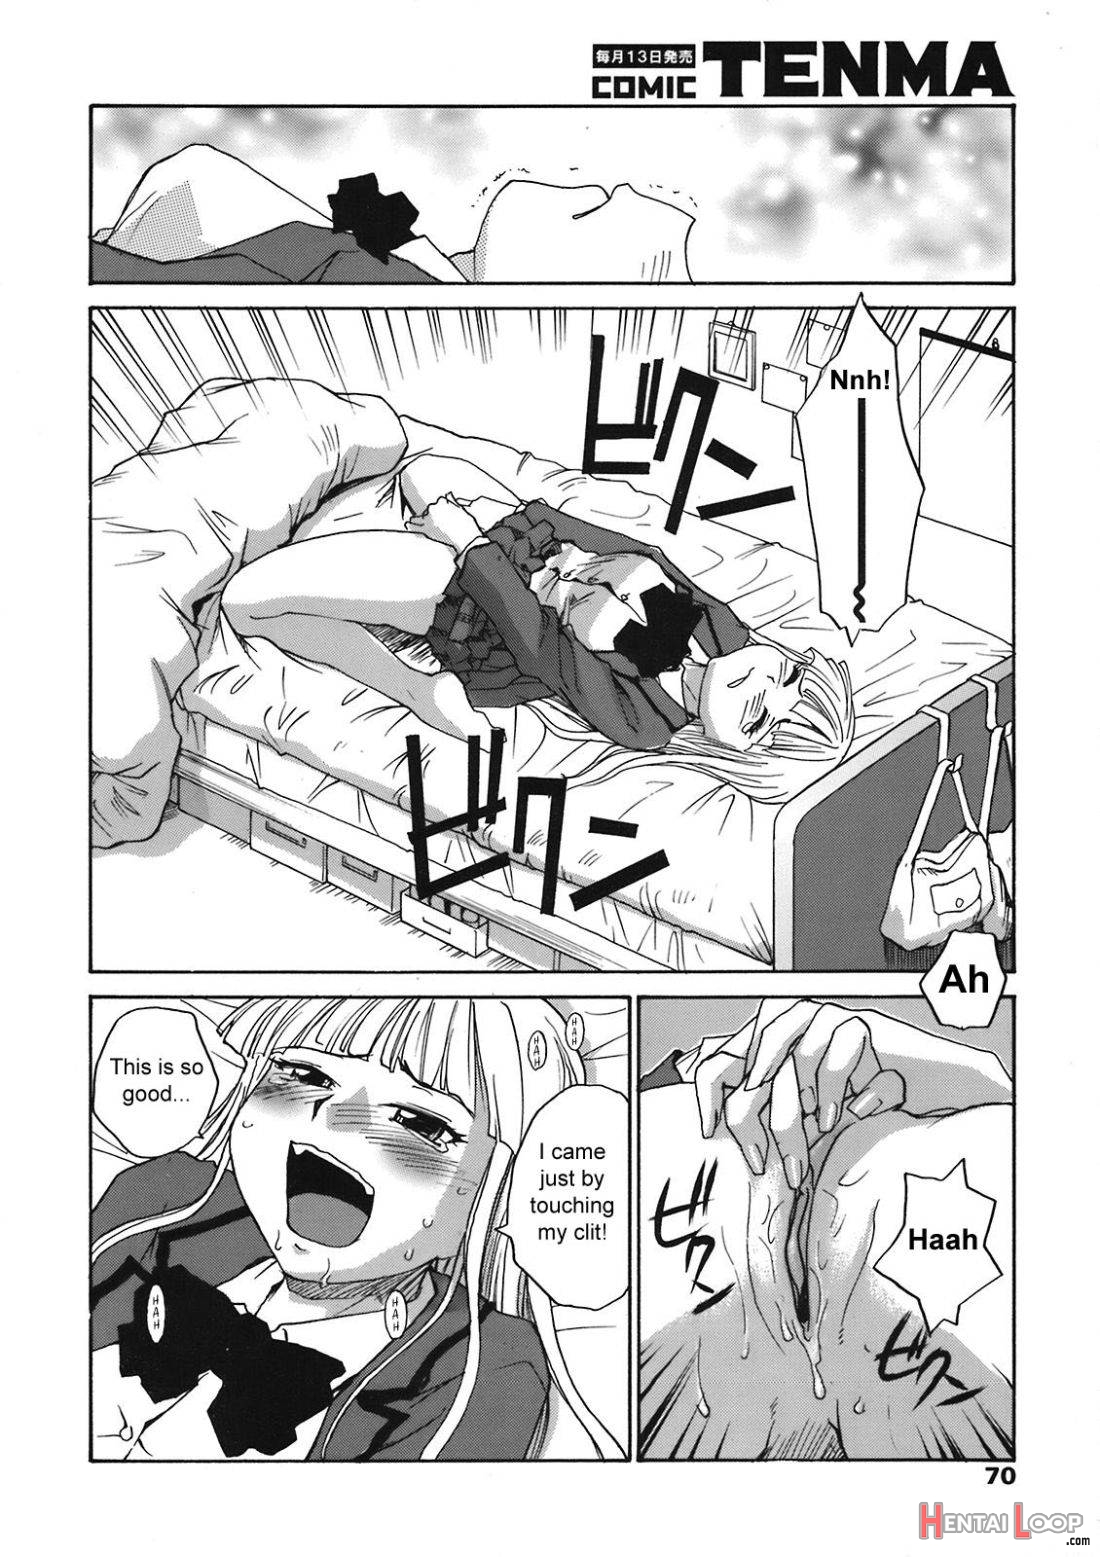 Back to Nee-chan page 4